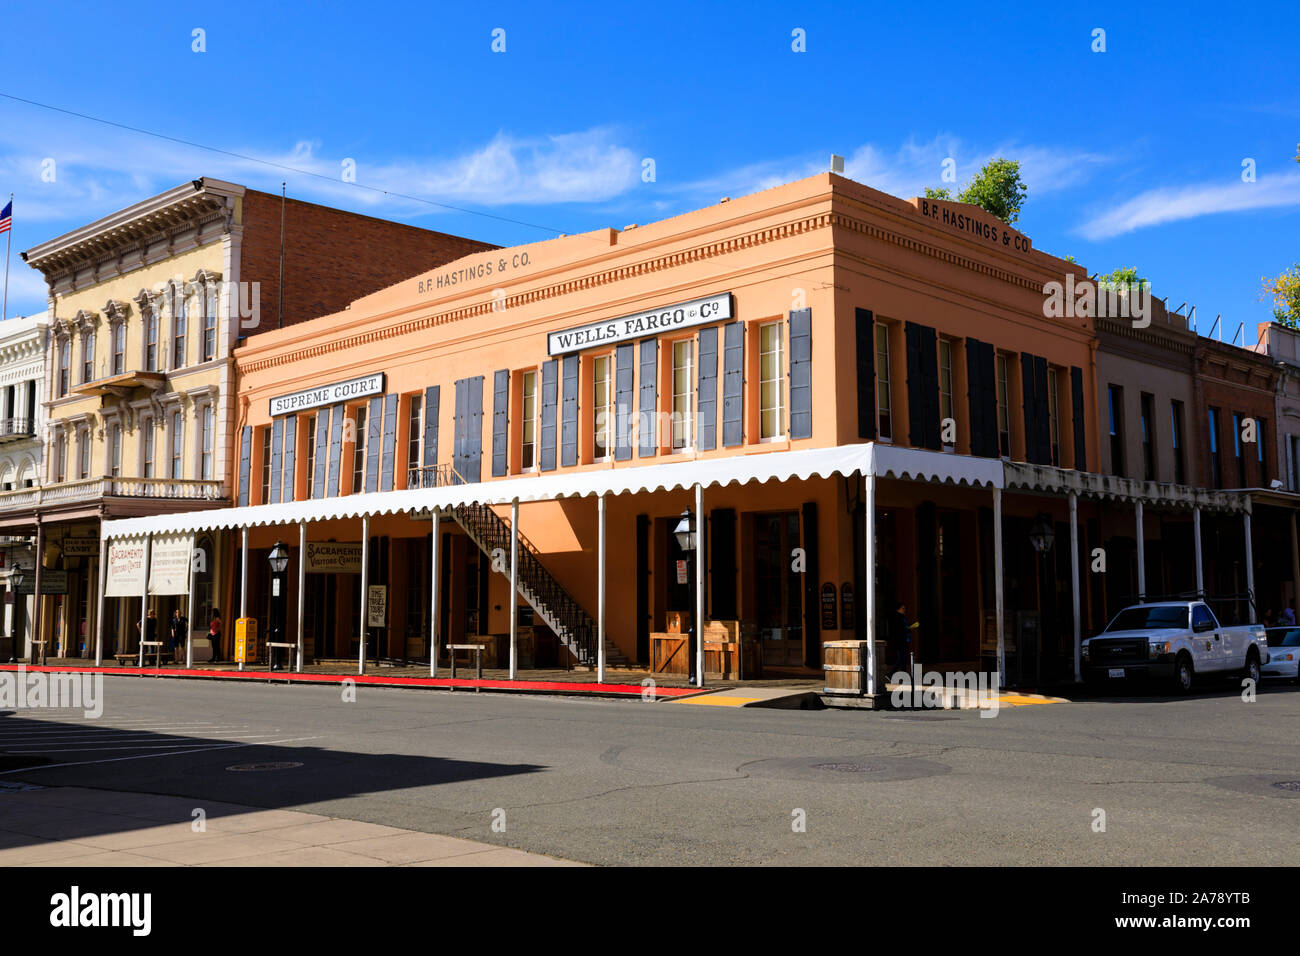 BF Hastings Wells Fargo & Co building, Old Town, Sacramento, State capital of California, United States of America. Stock Photo